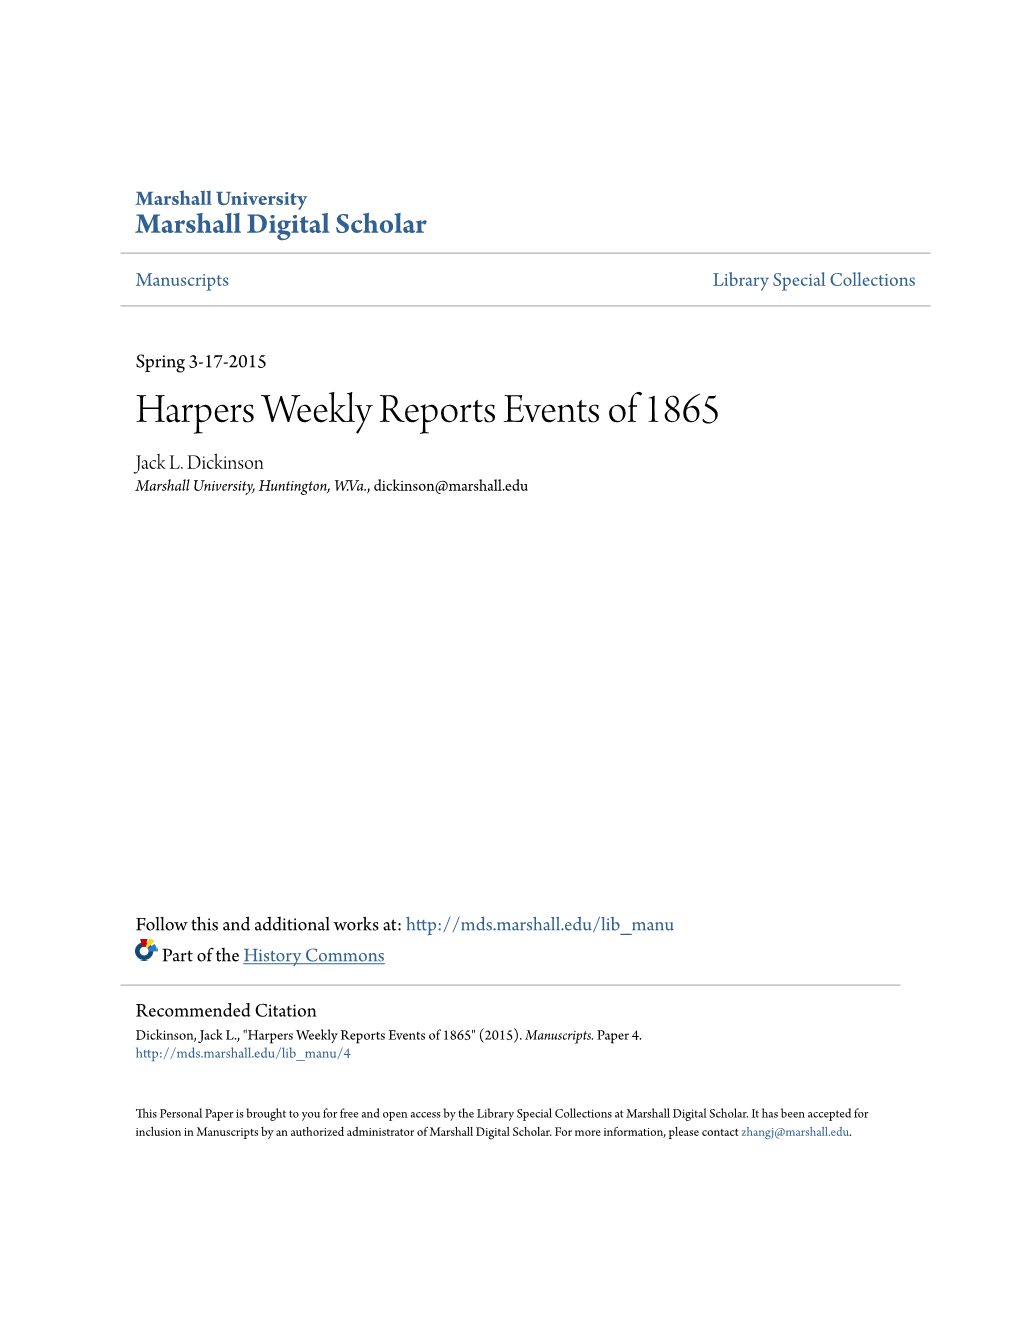 Harpers Weekly Reports Events of 1865 Jack L